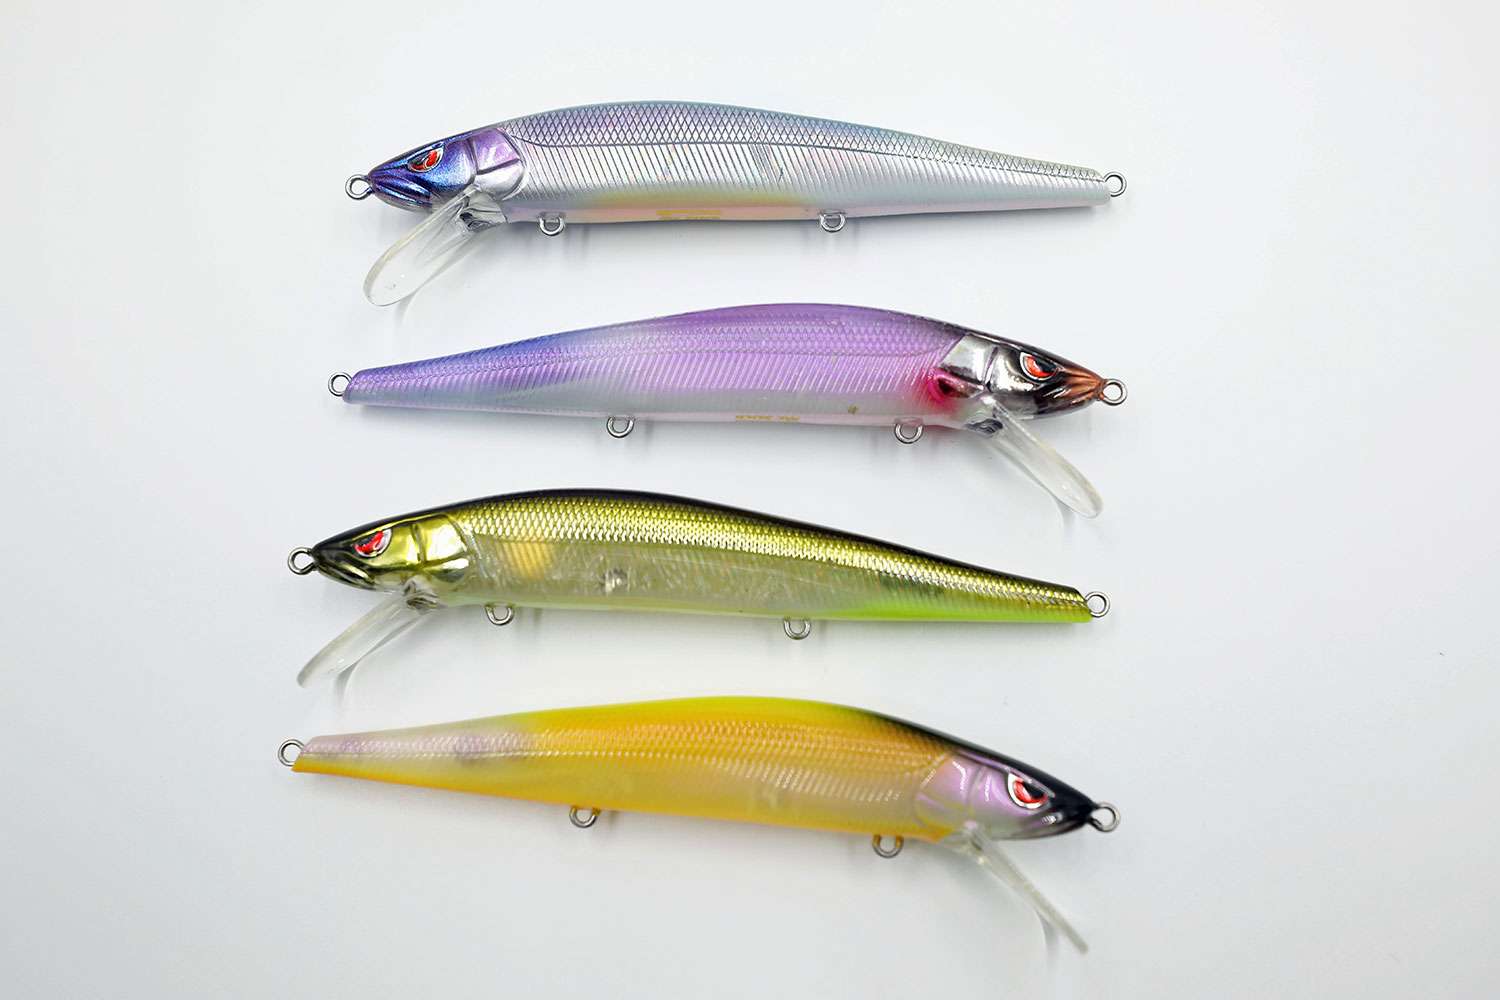   <B>Spro McStick 110 New Colors</B><BR>
The suspending jerkbait is now available in four new colors including PM Twilight, McAyu, Ghost Magic Purple and Nanko reaction.
<BR>
<B>MSRP: $12.99</B>